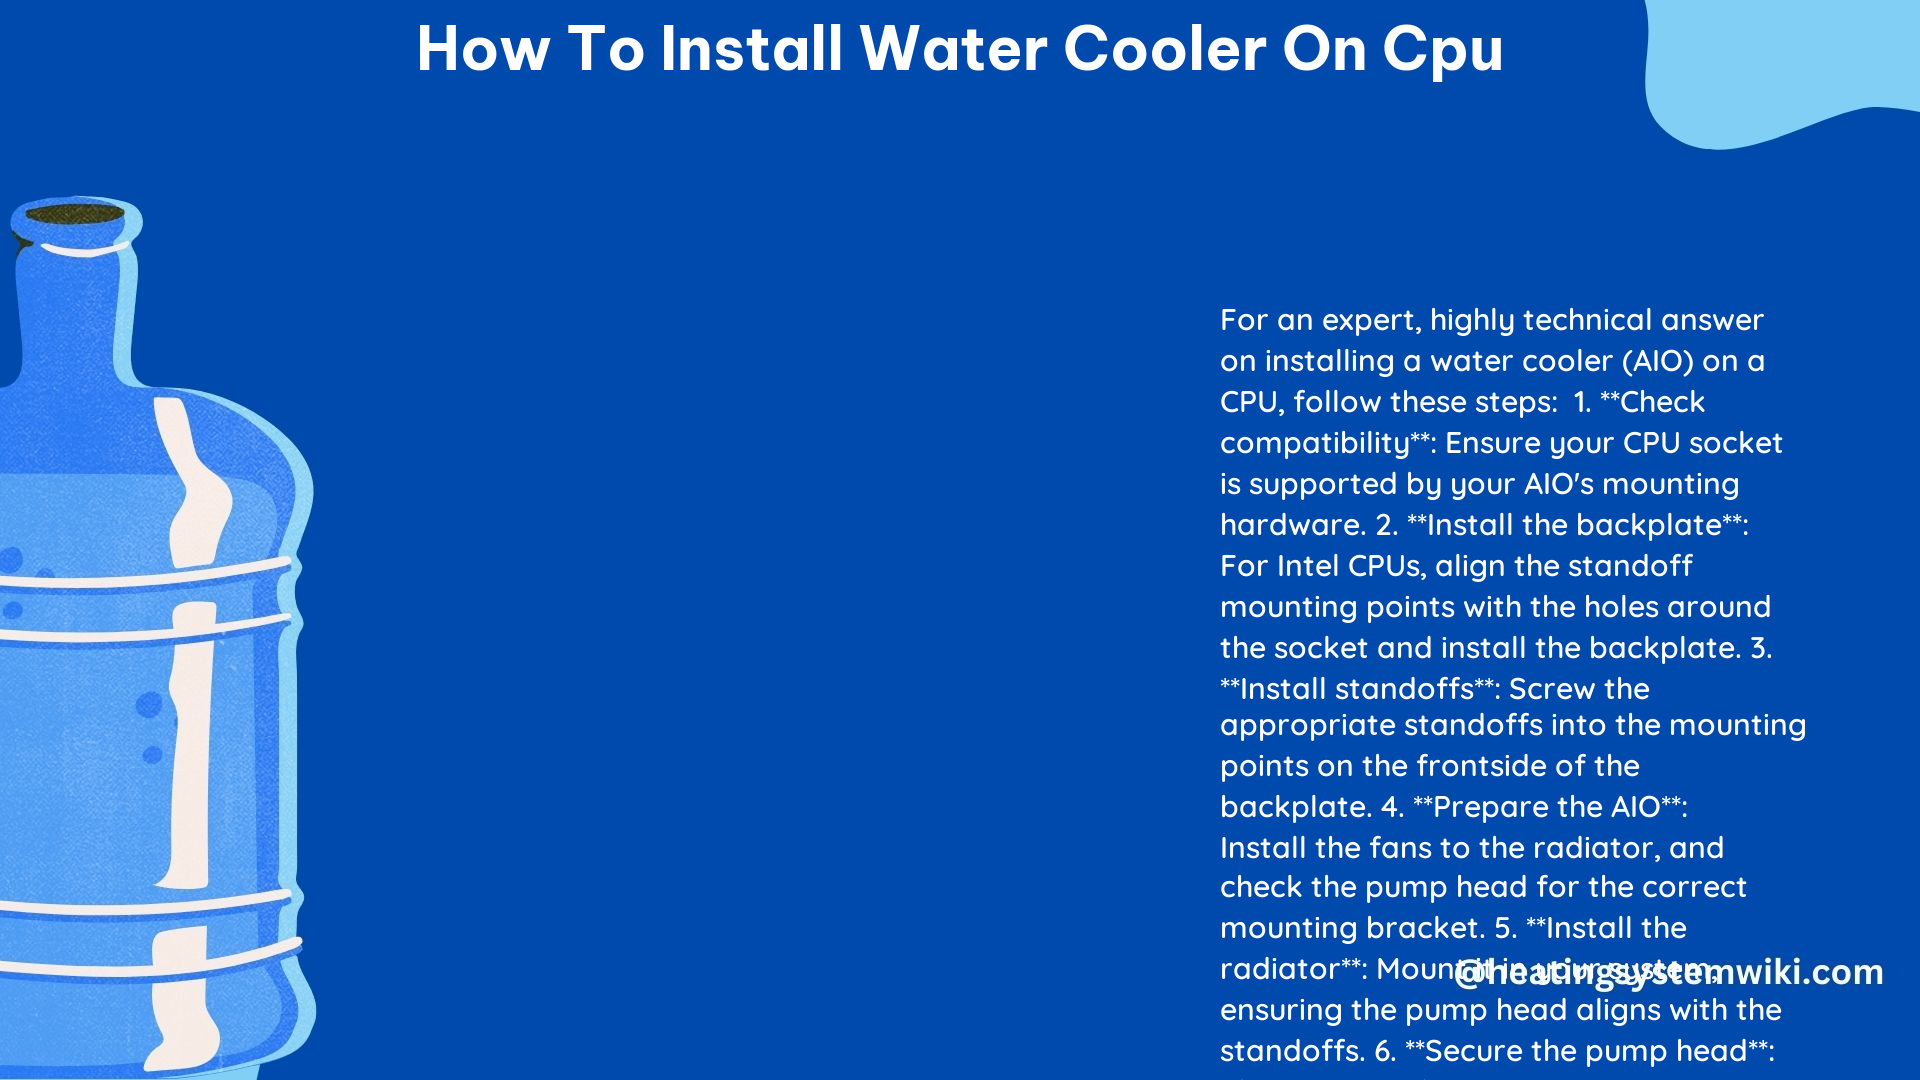 How to Install Water Cooler on CPU